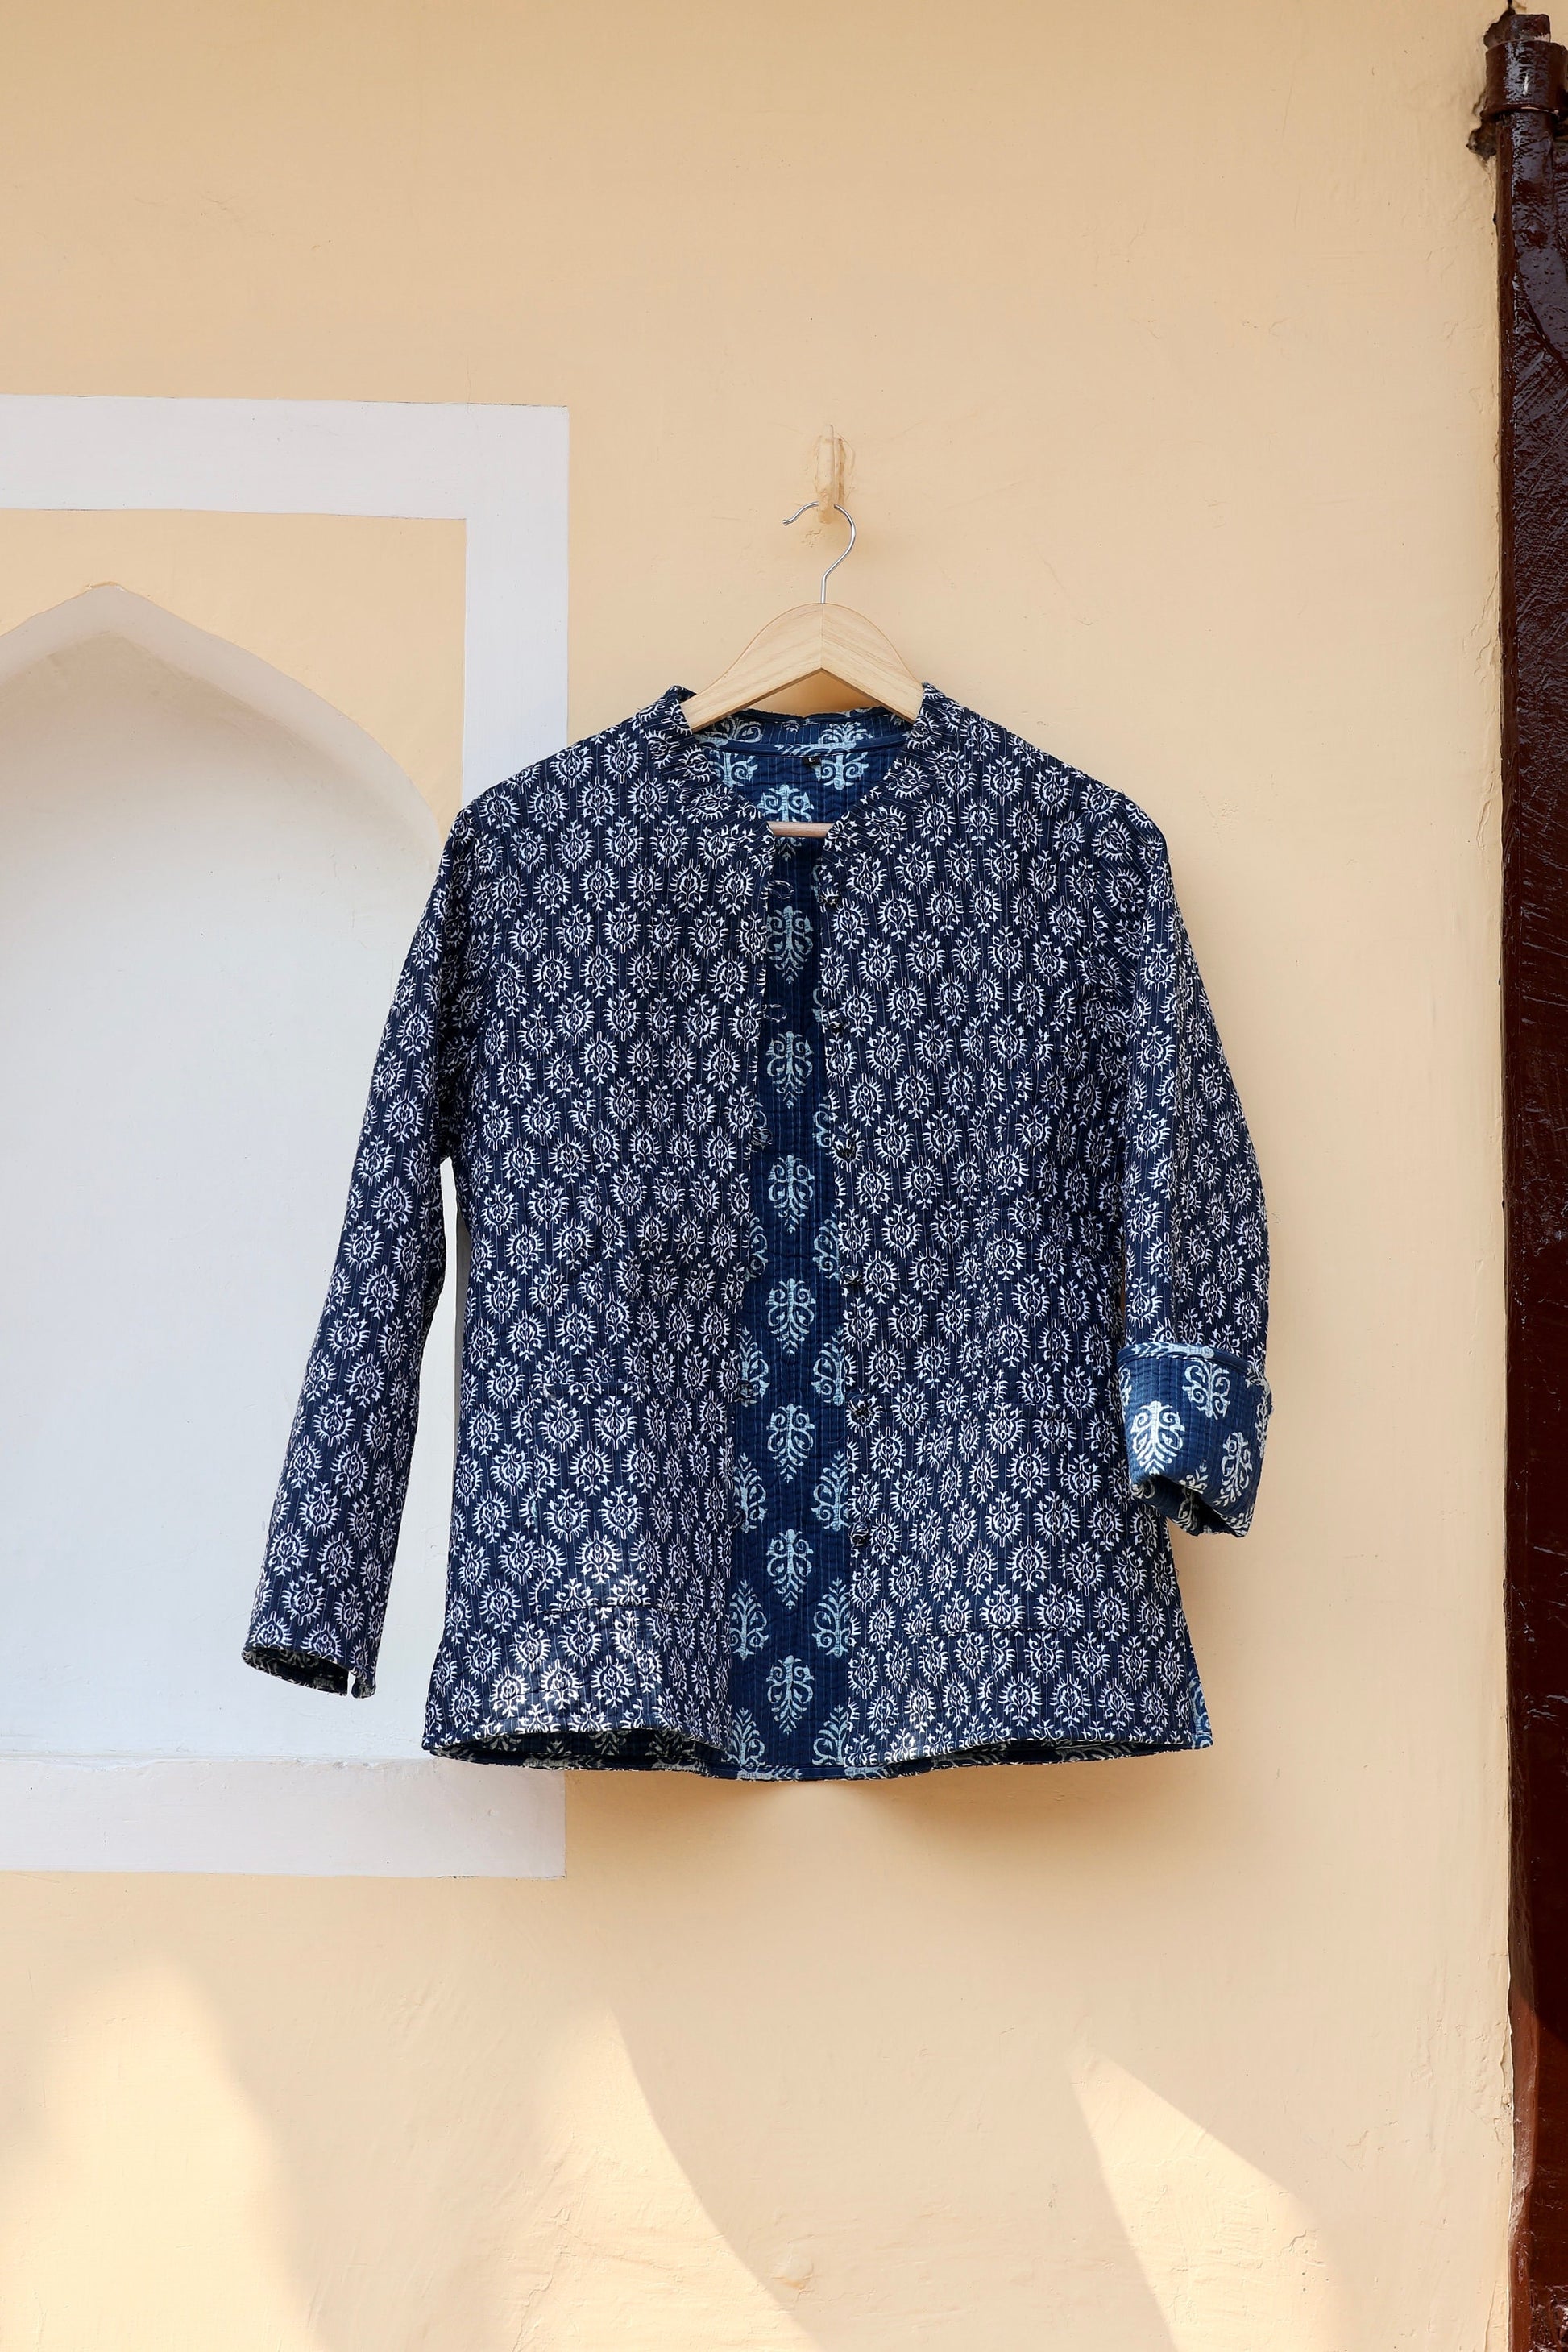 Indian Handmade Quilted Cotton Fabric Kantha Jacket Stylish Blue & White Floral Bohemian Women's Coat, Reversible Waistcoat for Her